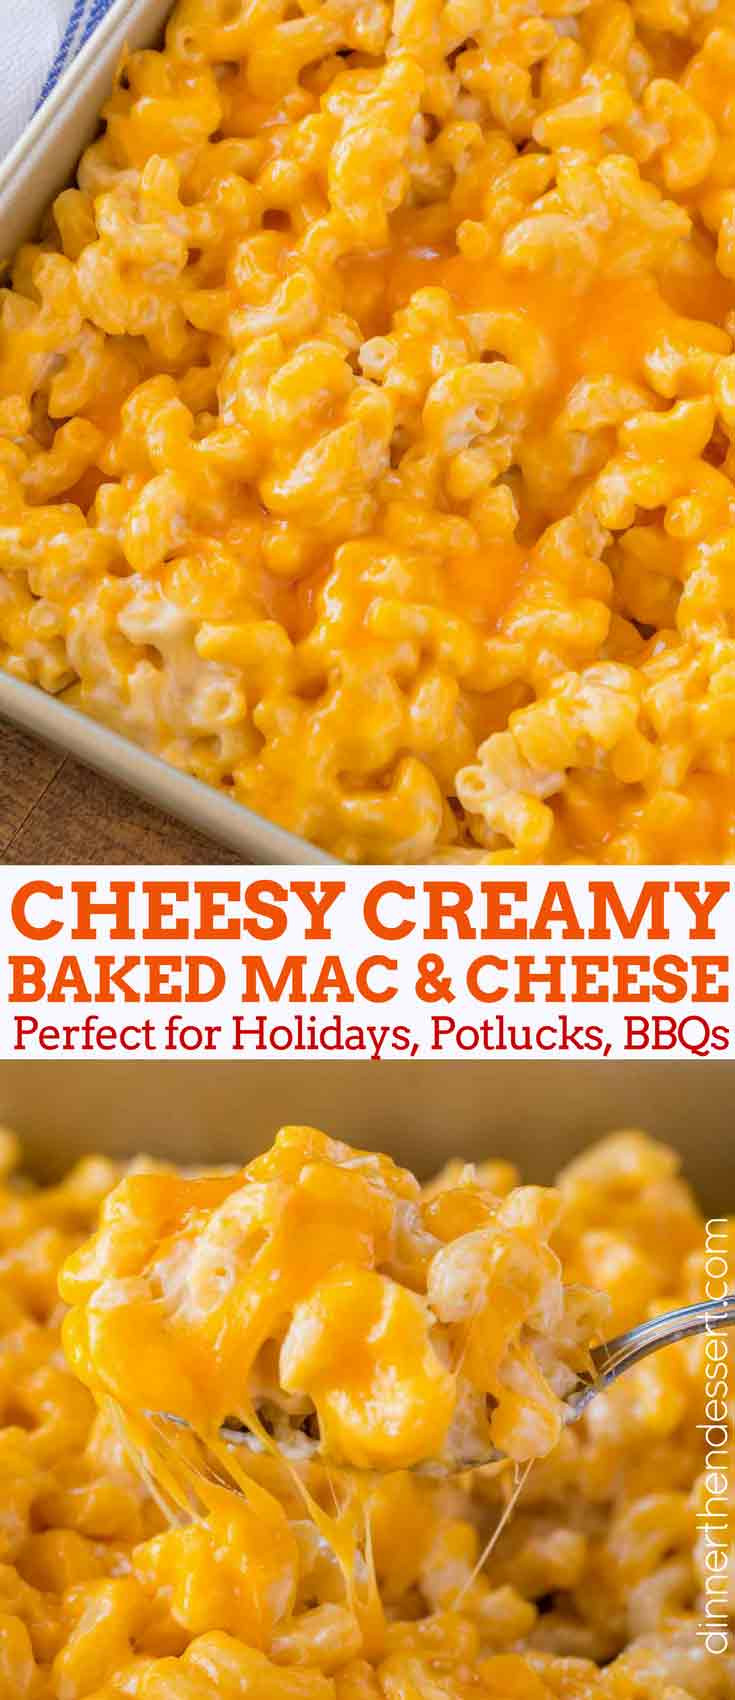 Dessert Mac And Cheese
 Baked Mac and Cheese Recipe Dinner then Dessert